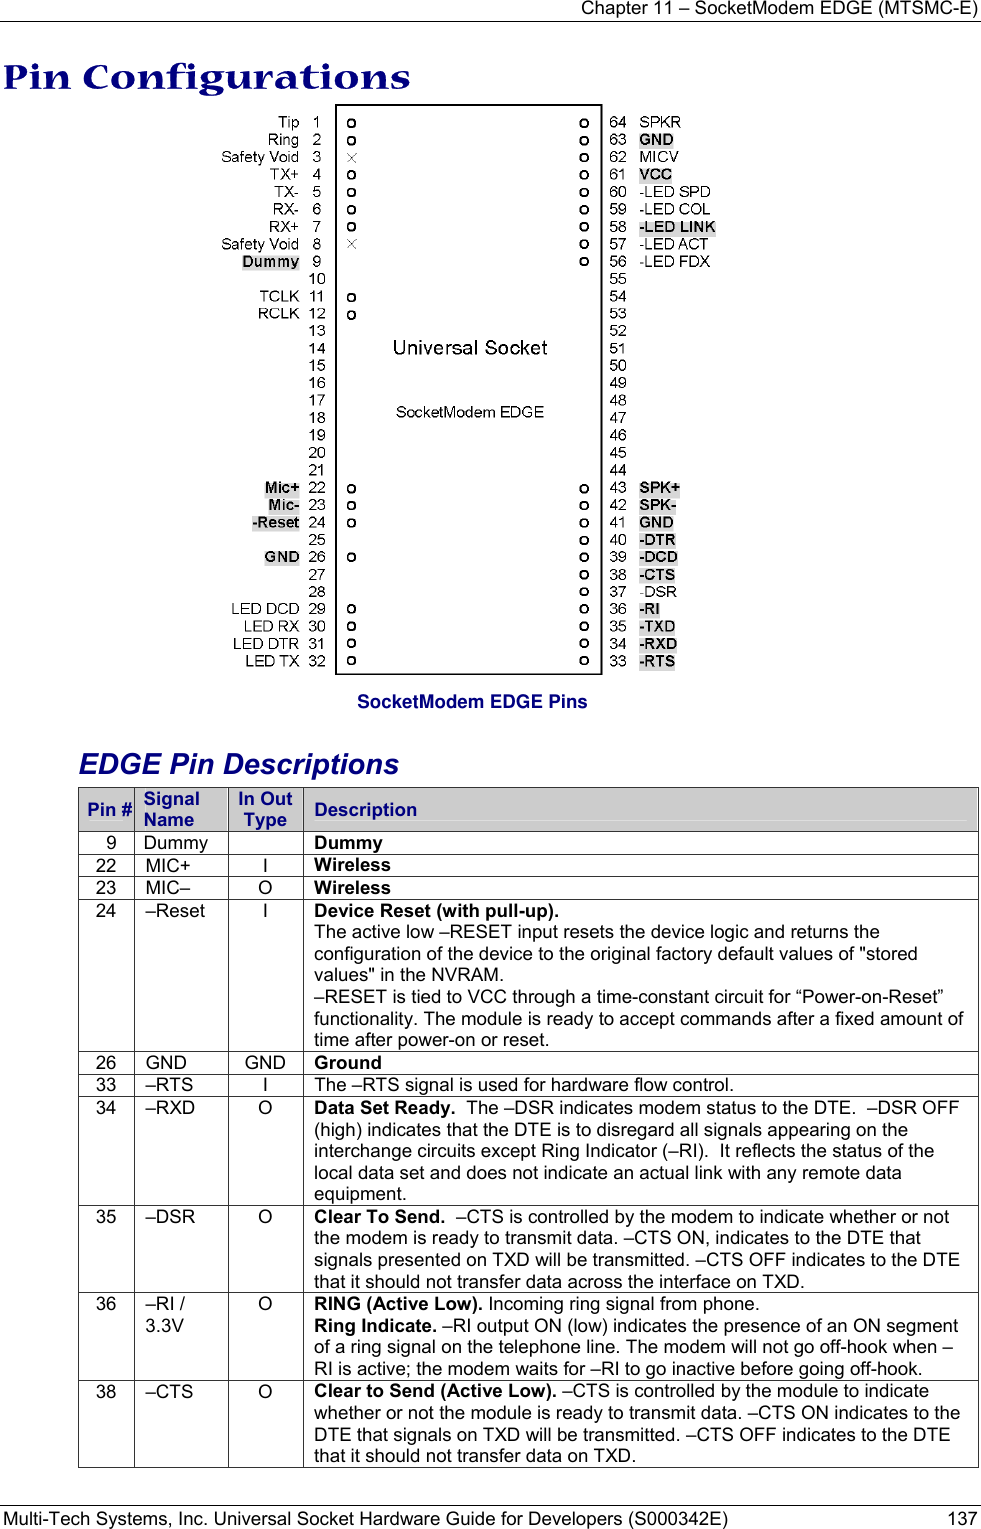 Chapter 11 – SocketModem EDGE (MTSMC-E) Multi-Tech Systems, Inc. Universal Socket Hardware Guide for Developers (S000342E)  137 Pin Configurations                                   SocketModem EDGE Pins  EDGE Pin Descriptions Pin #  Signal Name In Out Type  Description   9  Dummy    Dummy 22 MIC+  I  Wireless 23 MIC–  O  Wireless  24 –Reset  I  Device Reset (with pull-up).  The active low –RESET input resets the device logic and returns the configuration of the device to the original factory default values of &quot;stored values&quot; in the NVRAM. –RESET is tied to VCC through a time-constant circuit for “Power-on-Reset” functionality. The module is ready to accept commands after a fixed amount of time after power-on or reset.   26 GND  GND Ground 33 –RTS  I  The –RTS signal is used for hardware flow control. 34 –RXD  O  Data Set Ready.  The –DSR indicates modem status to the DTE.  –DSR OFF (high) indicates that the DTE is to disregard all signals appearing on the interchange circuits except Ring Indicator (–RI).  It reflects the status of the local data set and does not indicate an actual link with any remote data equipment. 35 –DSR  O  Clear To Send.  –CTS is controlled by the modem to indicate whether or not the modem is ready to transmit data. –CTS ON, indicates to the DTE that signals presented on TXD will be transmitted. –CTS OFF indicates to the DTE that it should not transfer data across the interface on TXD. 36 –RI / 3.3V O  RING (Active Low). Incoming ring signal from phone.  Ring Indicate. –RI output ON (low) indicates the presence of an ON segment of a ring signal on the telephone line. The modem will not go off-hook when –RI is active; the modem waits for –RI to go inactive before going off-hook. 38 –CTS  O  Clear to Send (Active Low). –CTS is controlled by the module to indicate whether or not the module is ready to transmit data. –CTS ON indicates to the DTE that signals on TXD will be transmitted. –CTS OFF indicates to the DTE that it should not transfer data on TXD.  